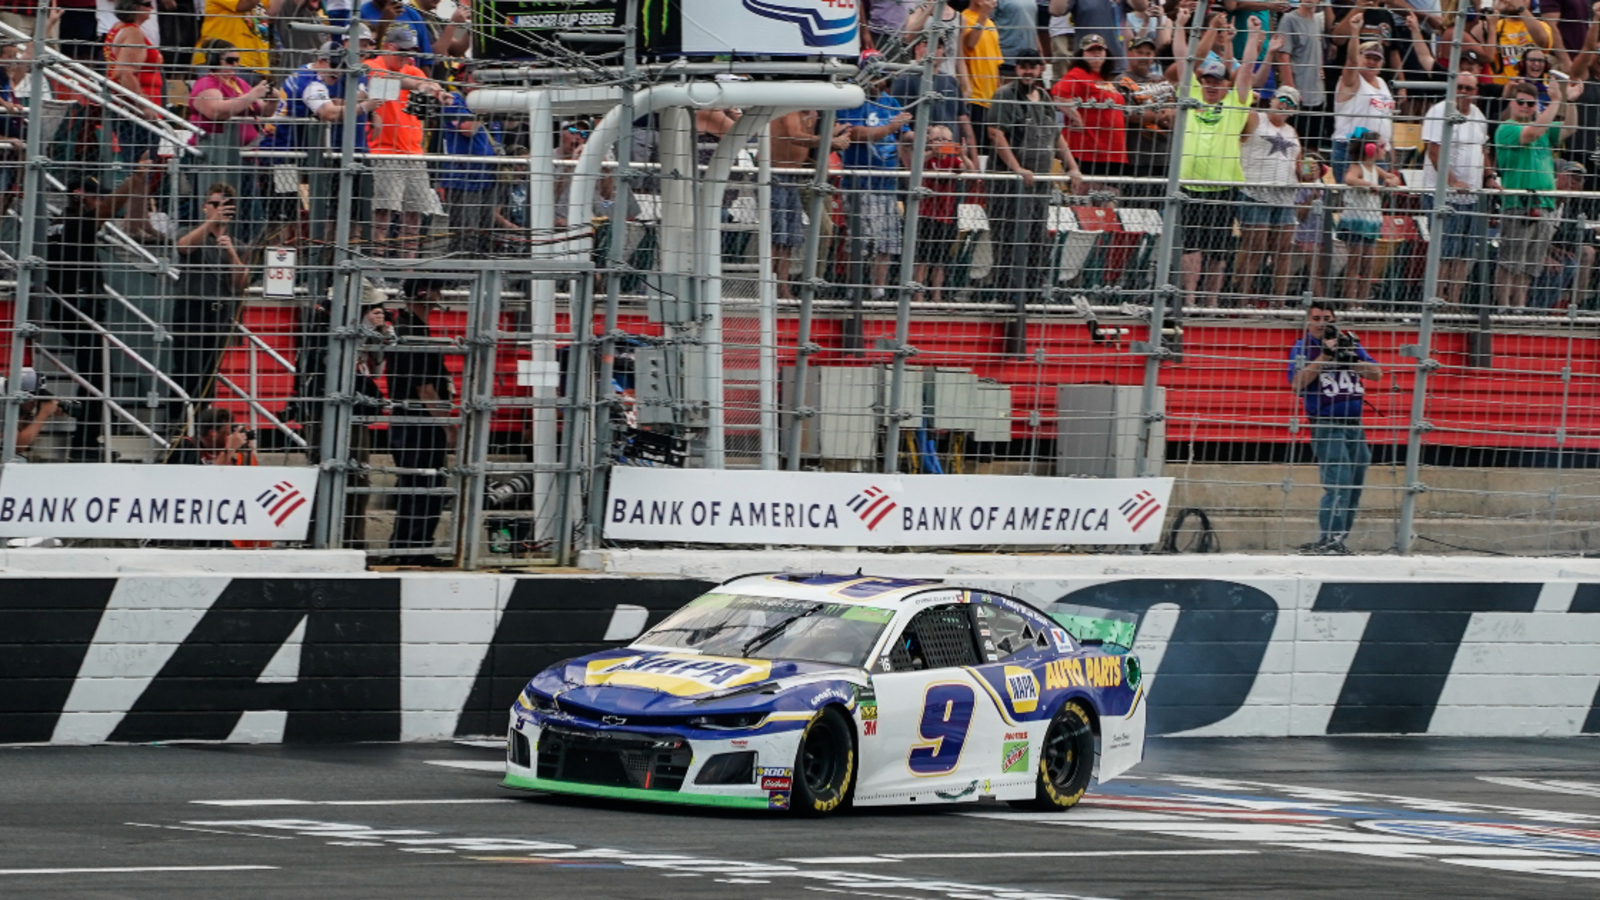 Chase Elliott climbs up the standings in NASCAR Owner’s Championship